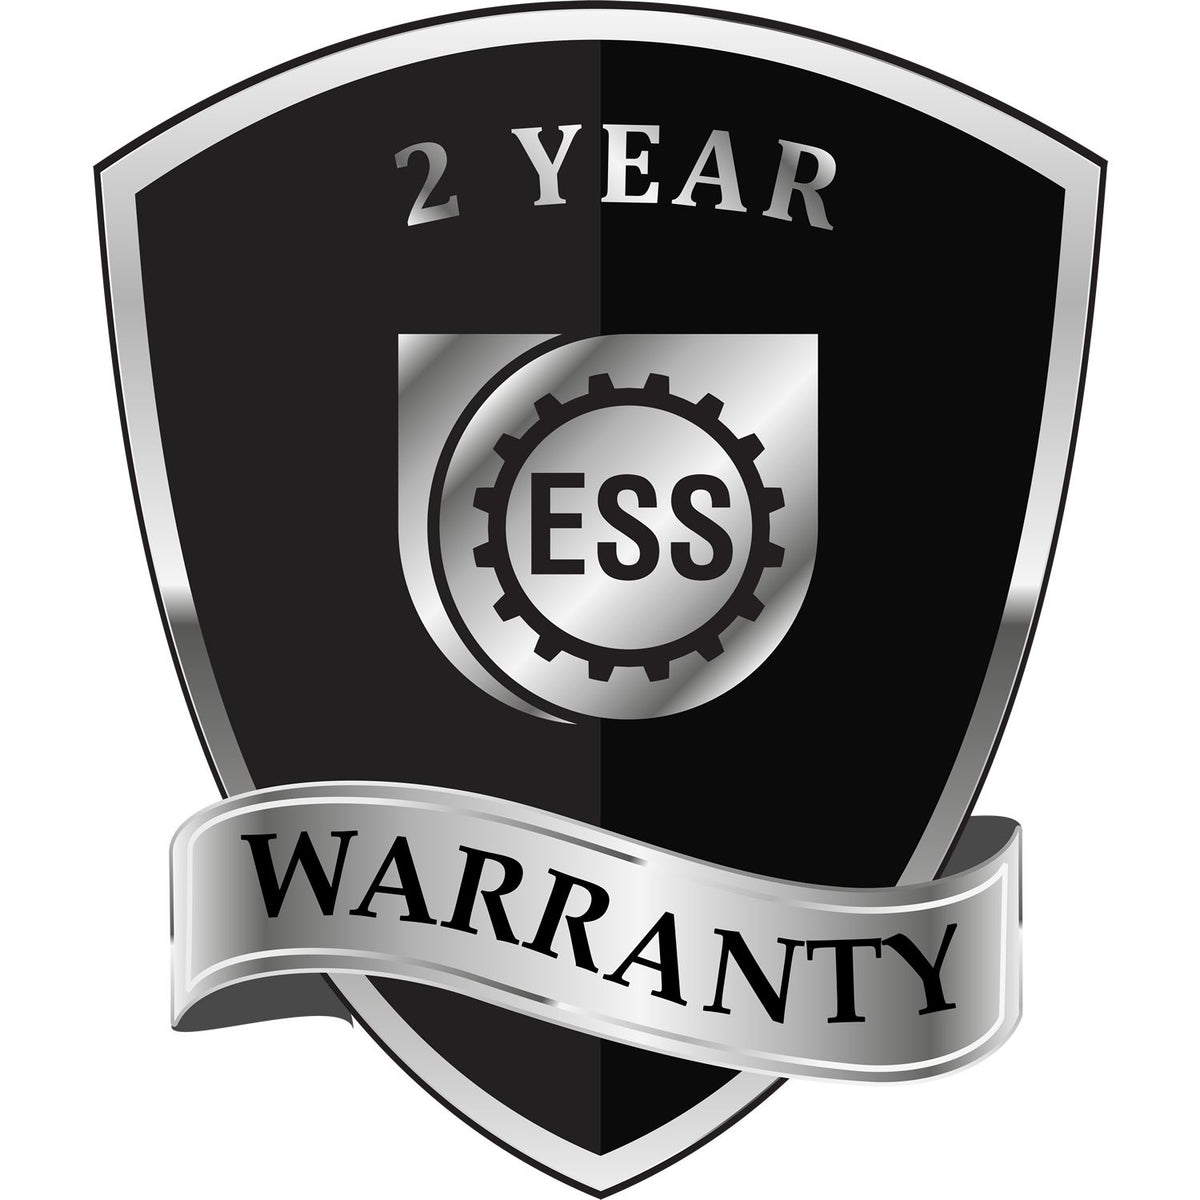 A black and silver badge or emblem showing warranty information for the Hybrid Colorado Architect Seal